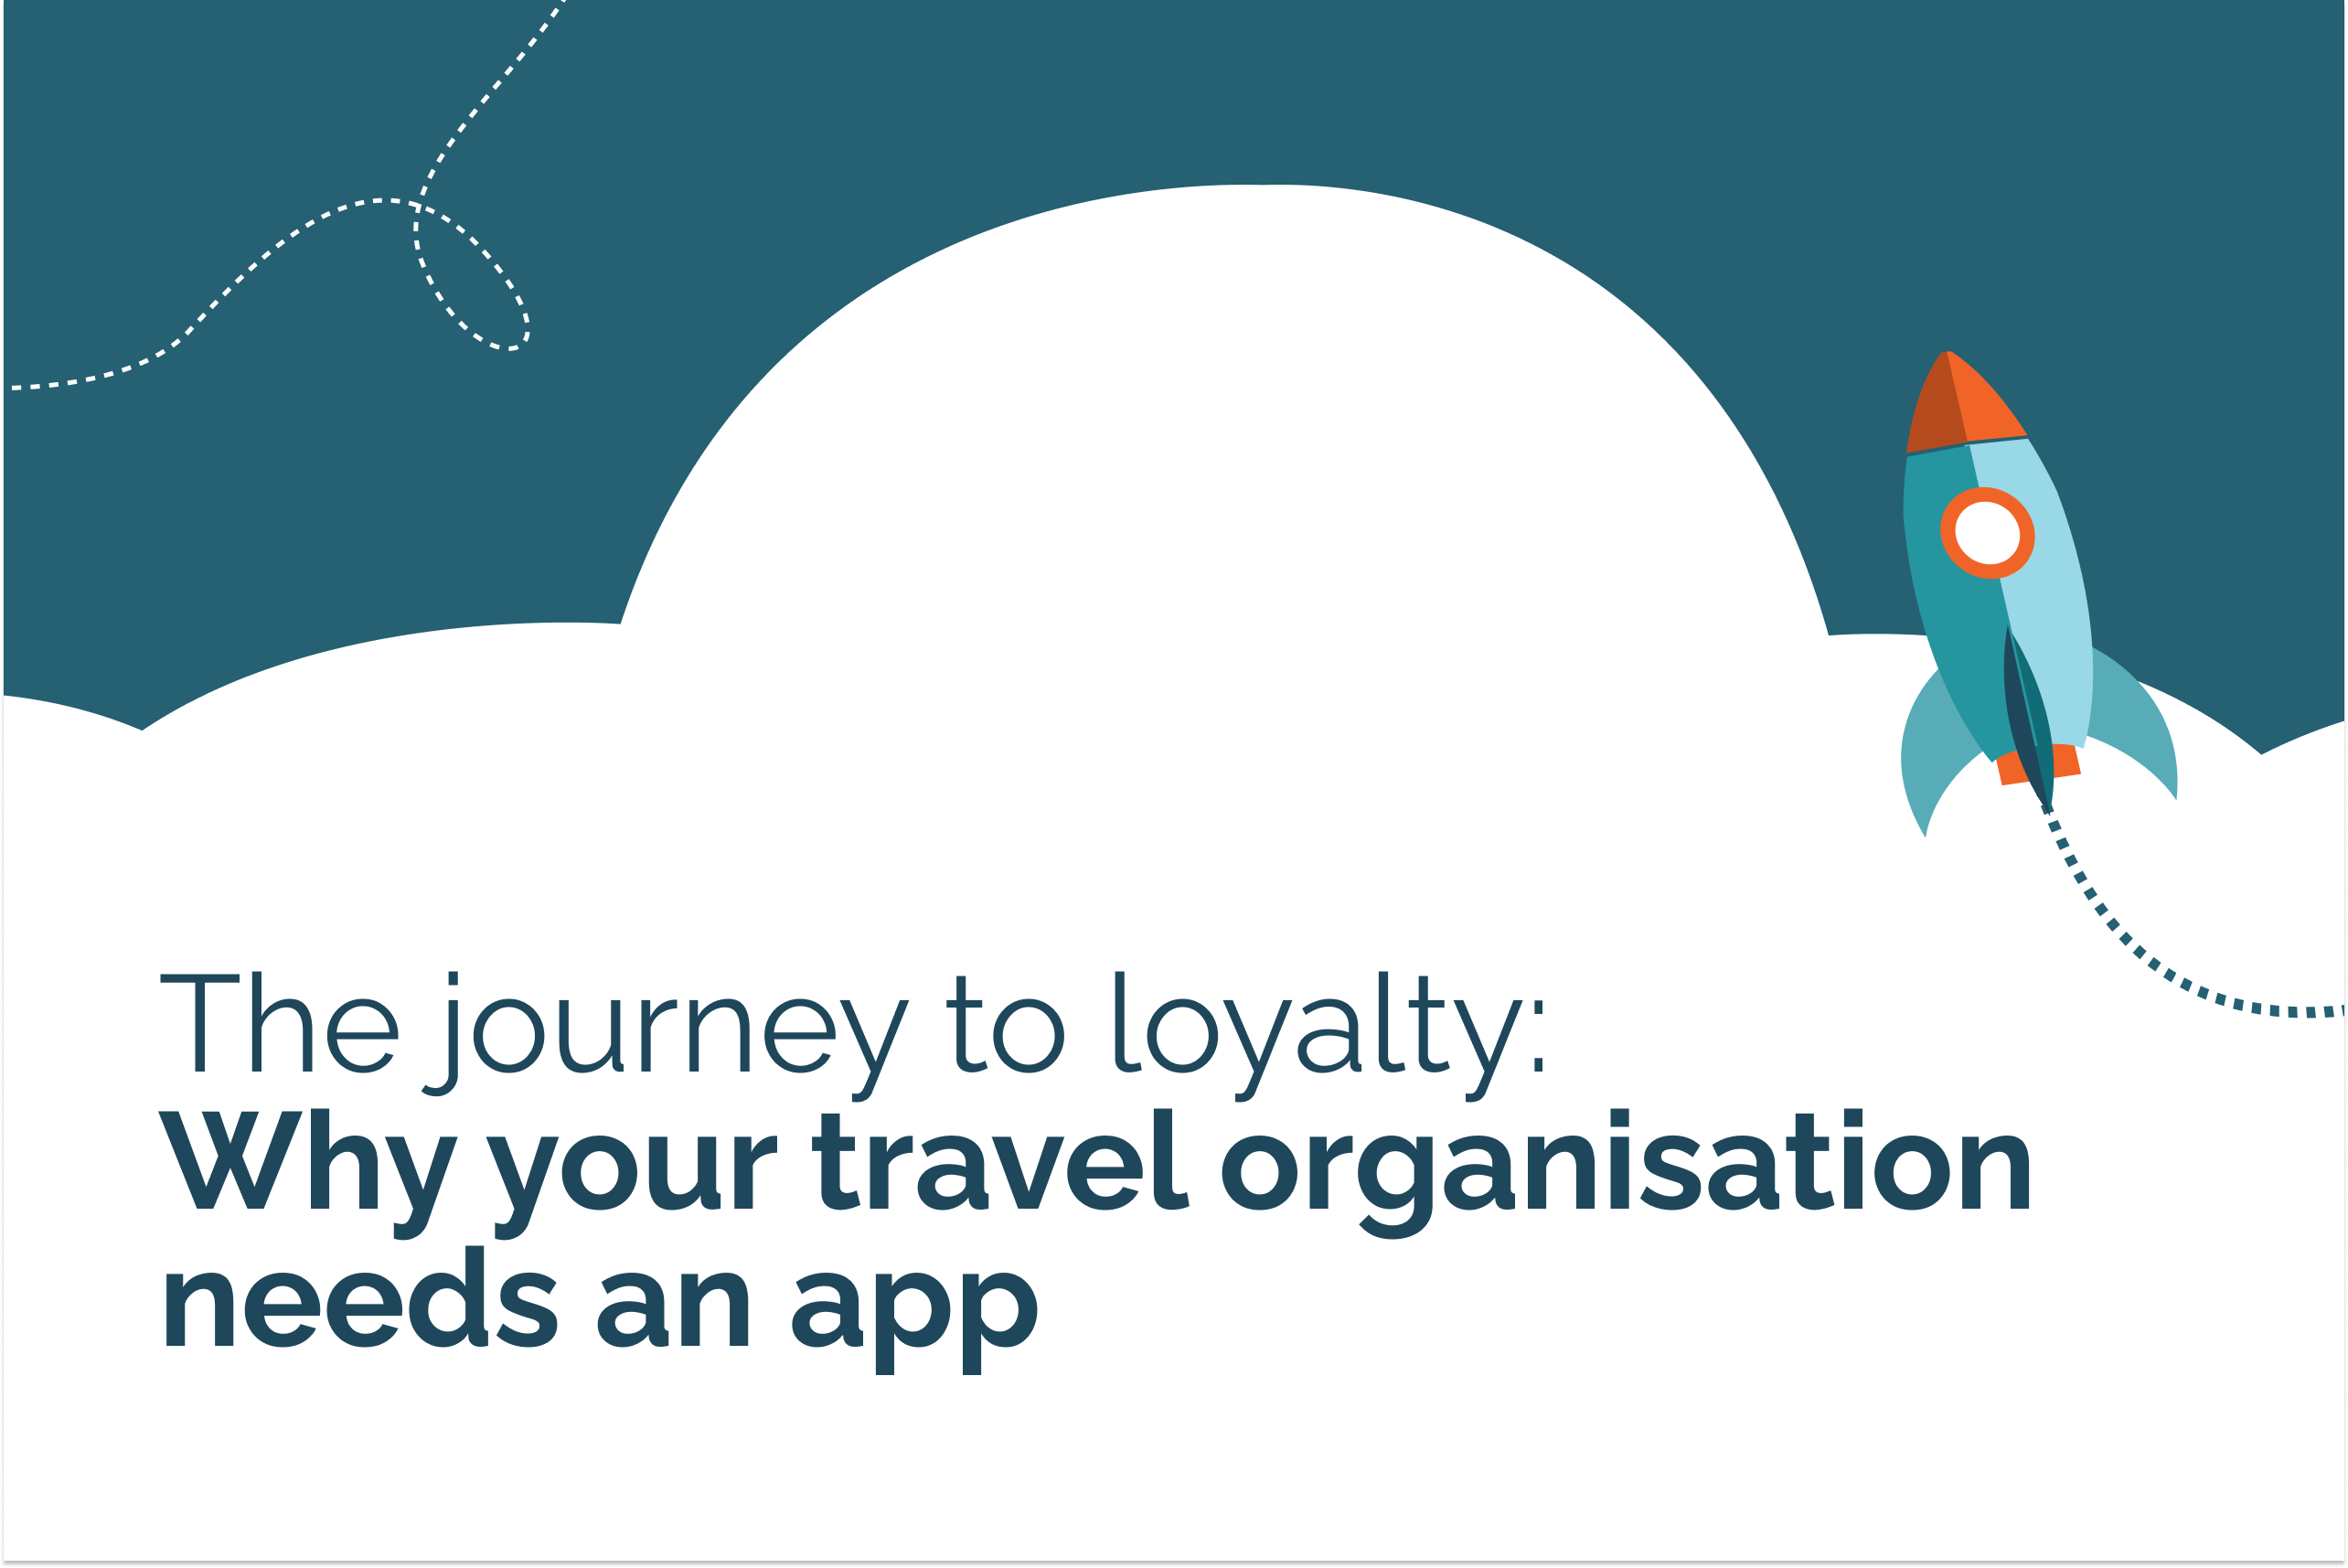 The journey to loyalty: Why your travel organisation needs an app